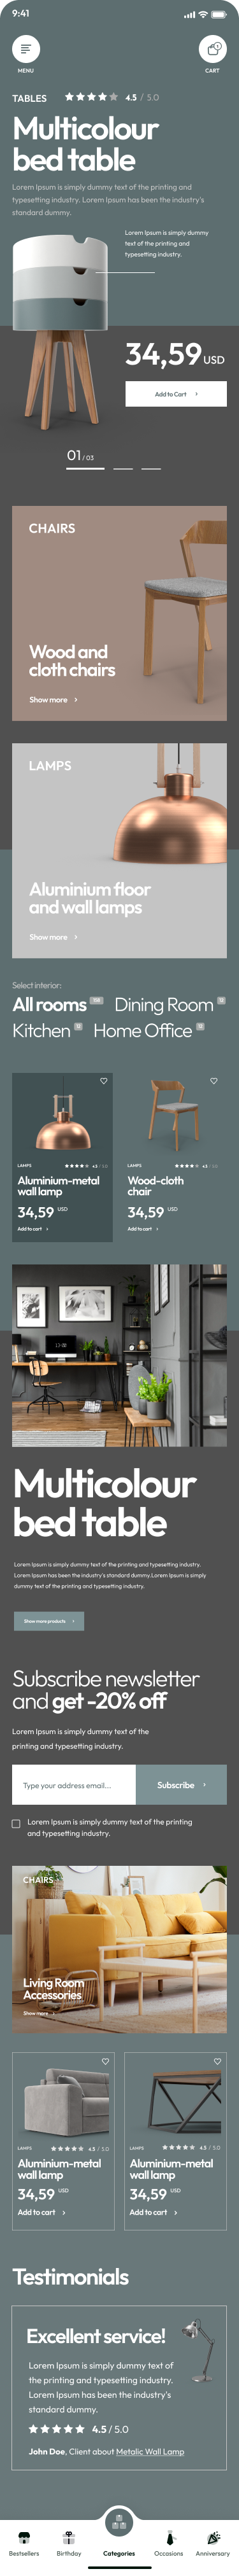 Home Decor – Mobile Apps for eCommerceGo SaaS